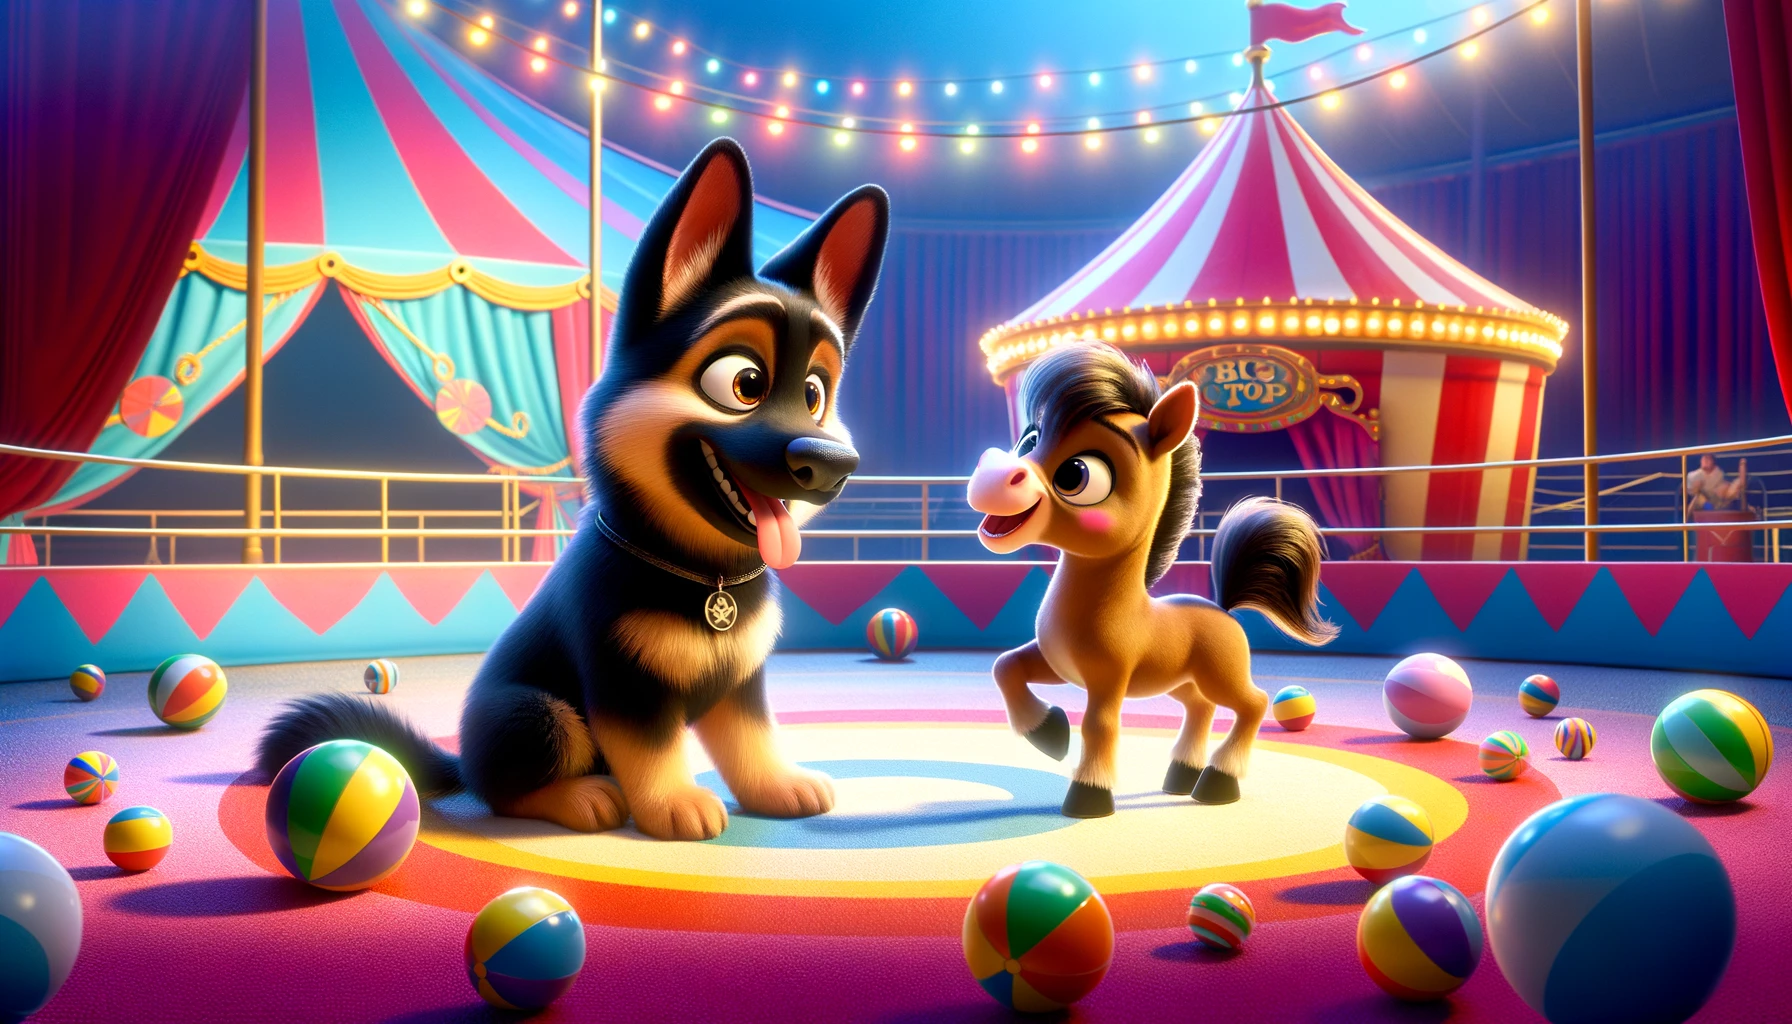 A dog and pony show in a cartoon style, featuring a playful black German Shepherd and a pony in a bright, colorful circus ring.